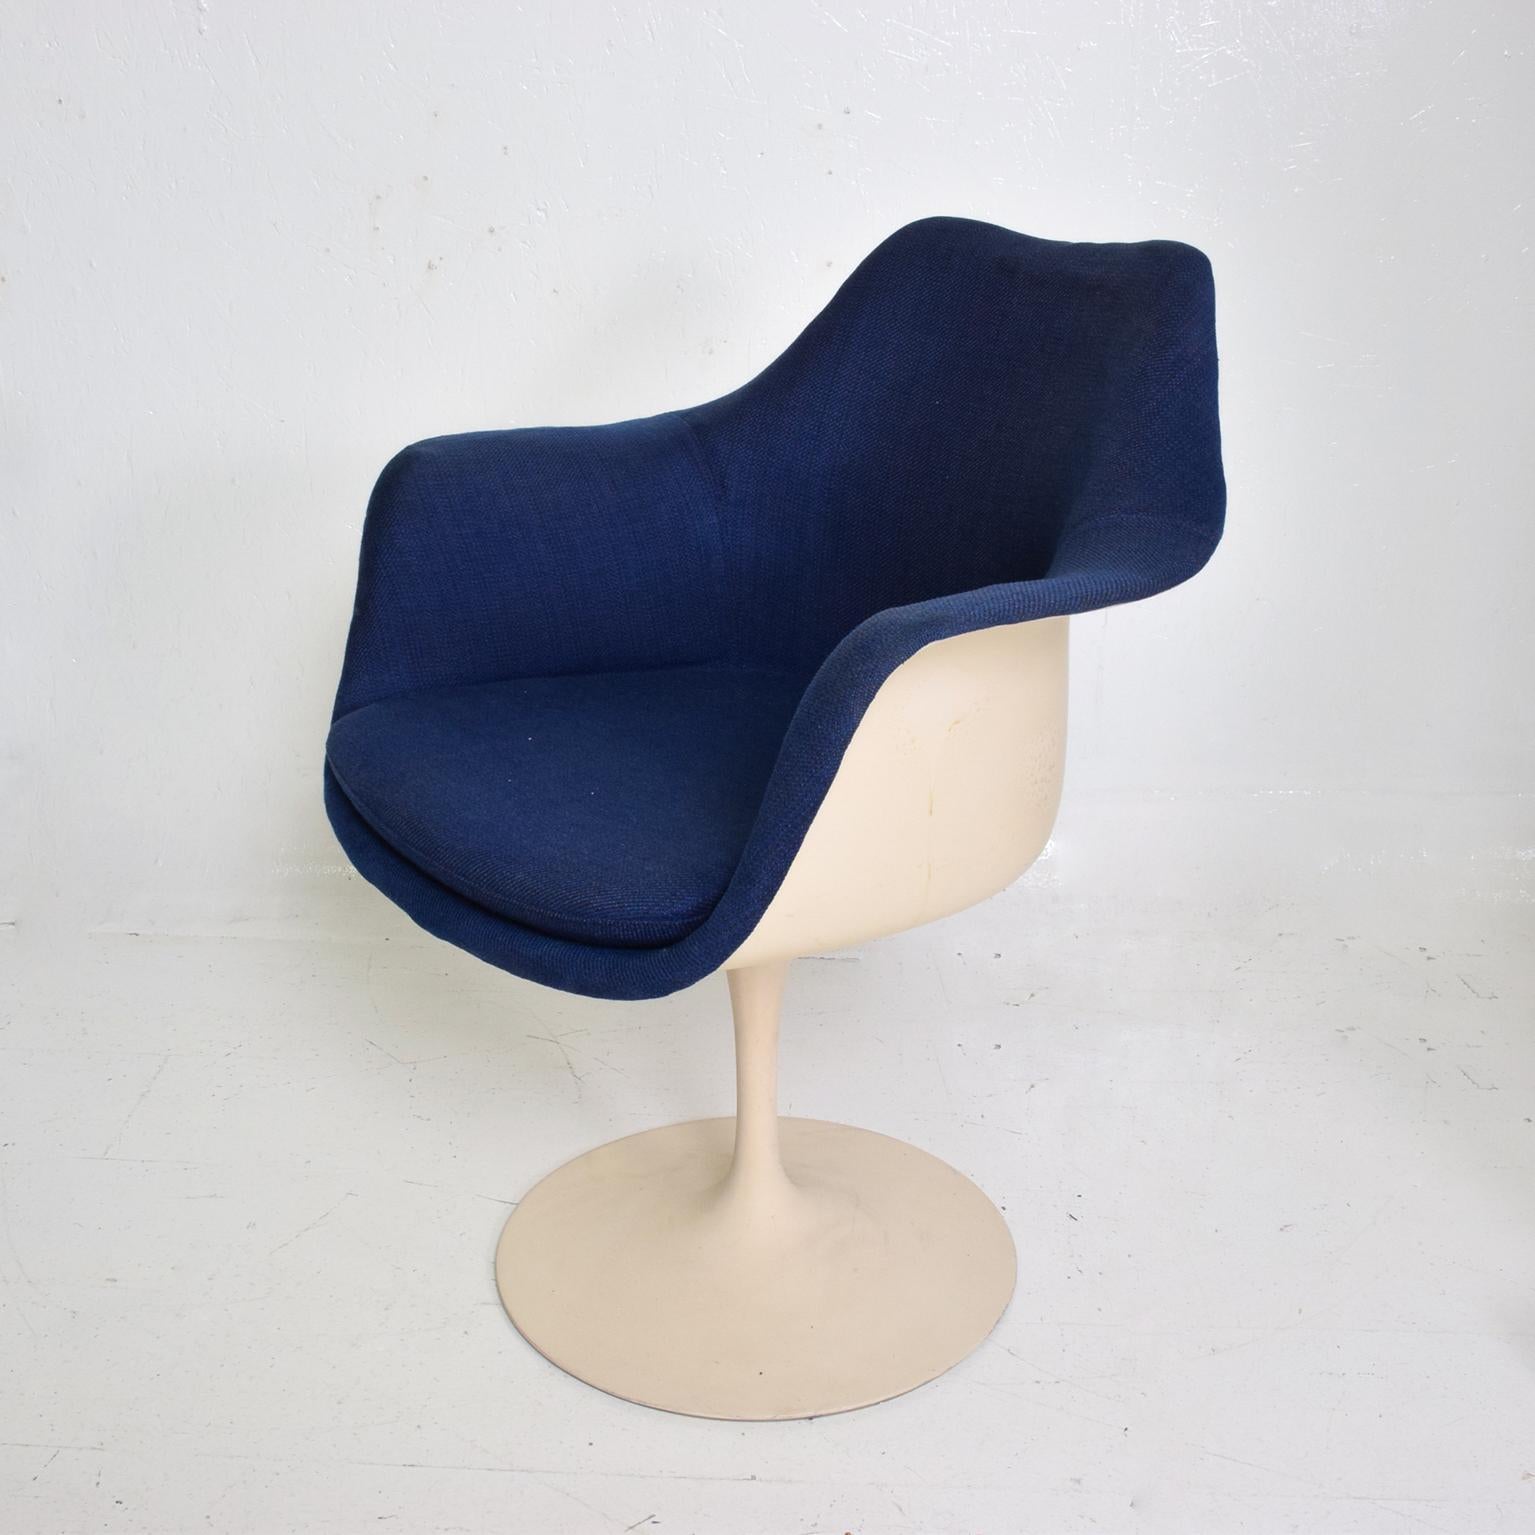 For your consideration, a Tulip chair by Eero Saarinen, made by Knoll, 1956, United States. Mid-Century Modern period. Retain label from the maker. Original blue upholstery and original unrestored finish. Dimensions: 32